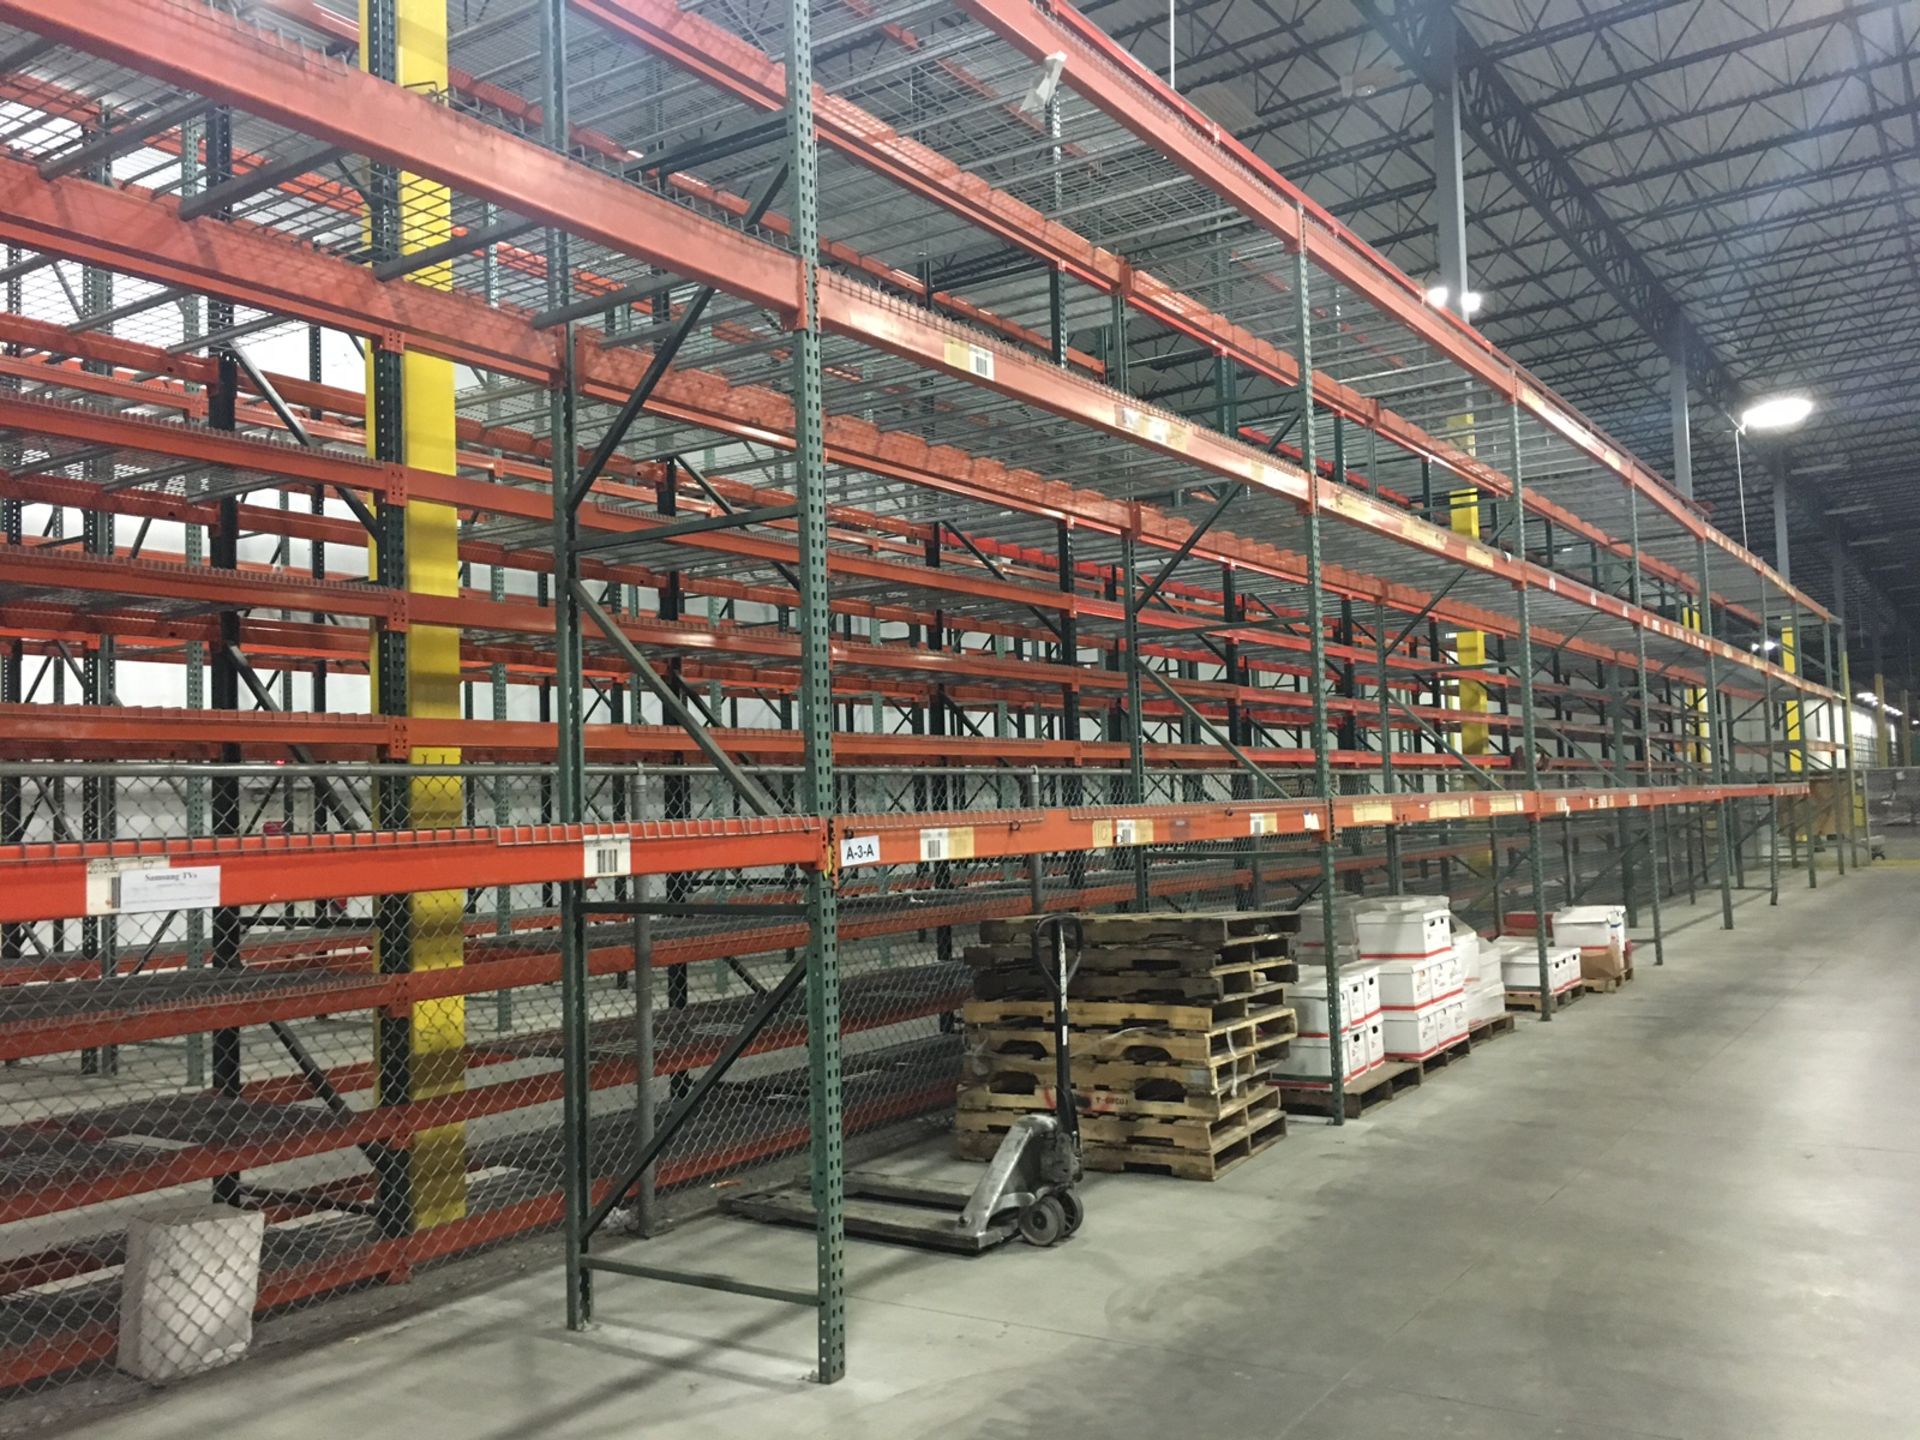 21 BAYS OF 15'H x 42"D X 156"W INTERLAKE TEARDROP STYLE PALLET RACK, (3 BEAM LEVEL, BACK TO BACK) - Image 3 of 3